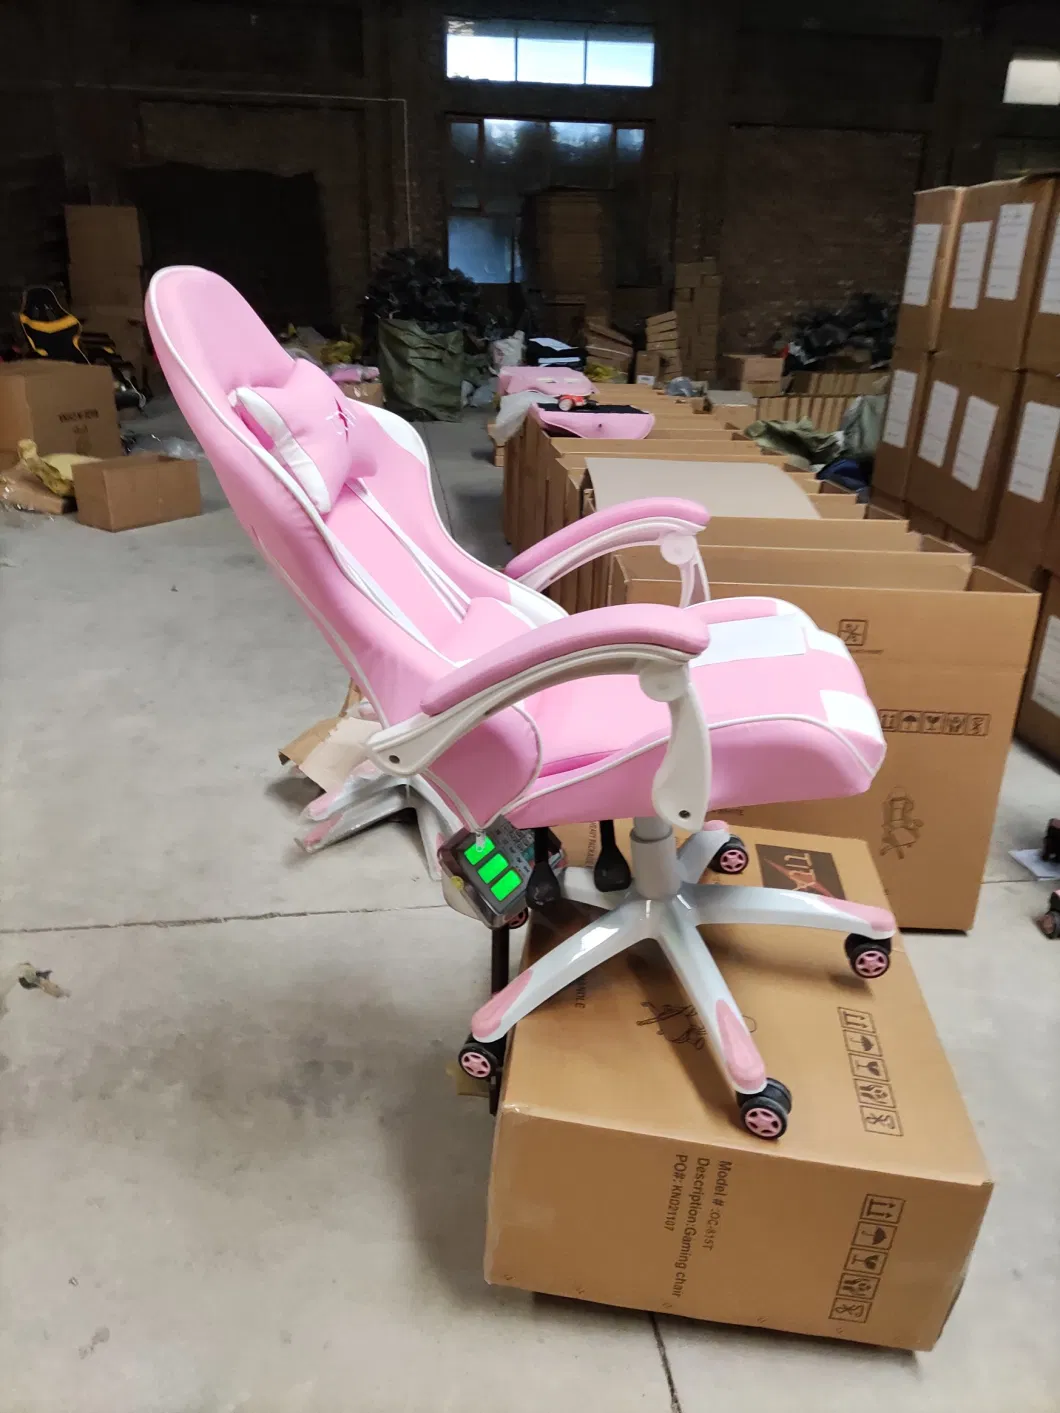 Office Furniture Ergonomic Sillas Gamer White and Pink Gaming Chair